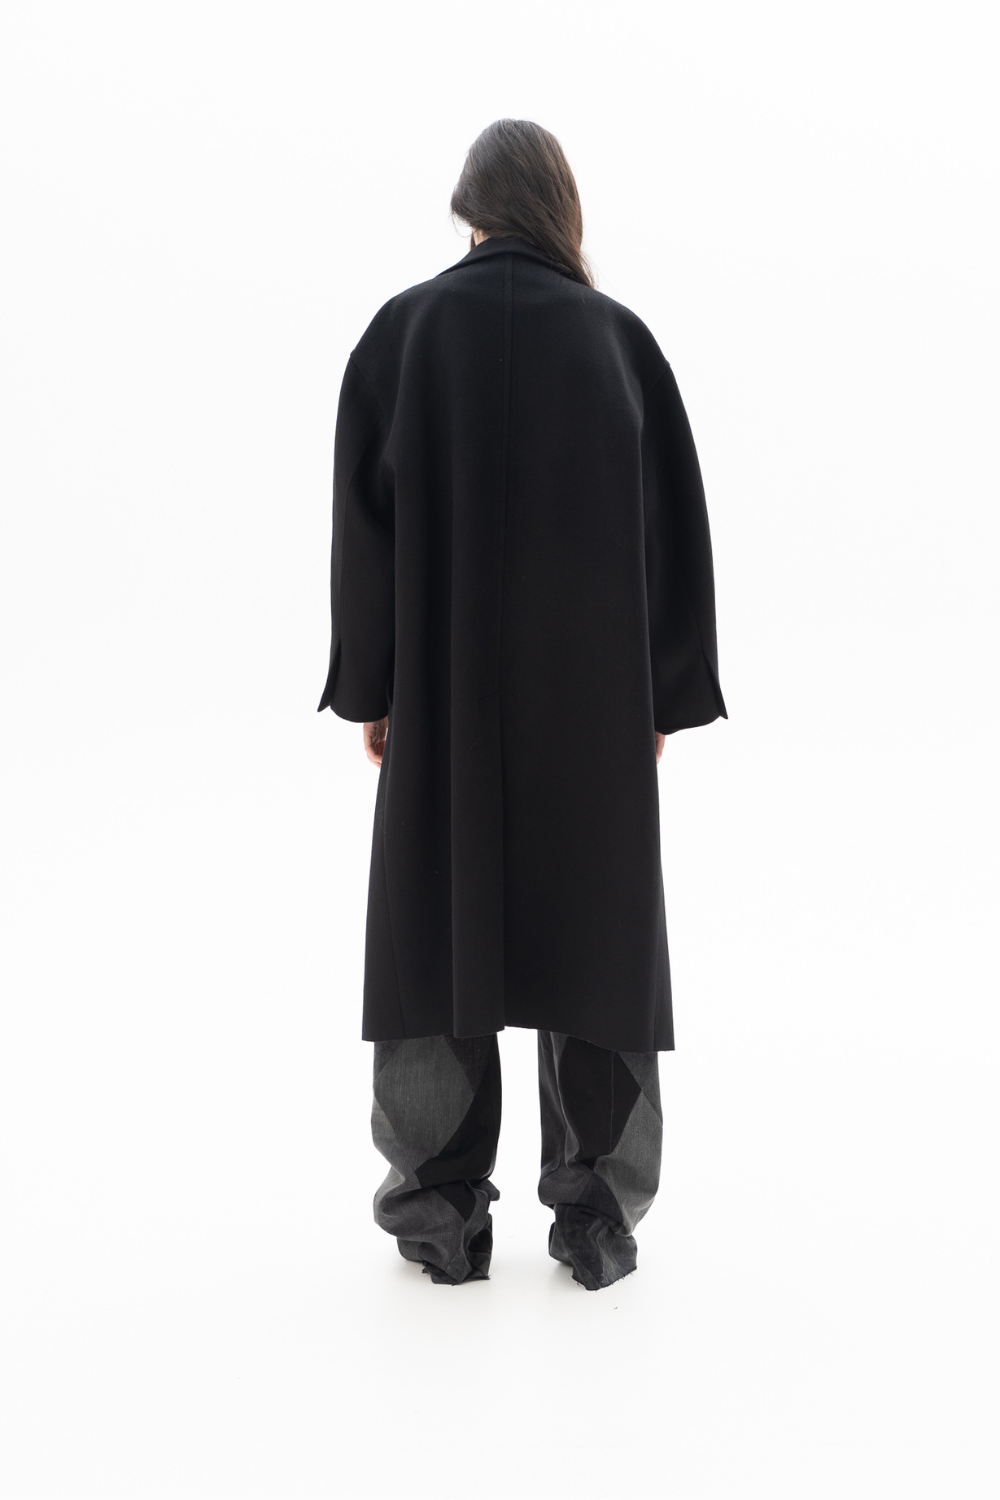 Oversized Woolen Coat with Visible Lining and Split Sleeves (GUDU) CT005AW22-23